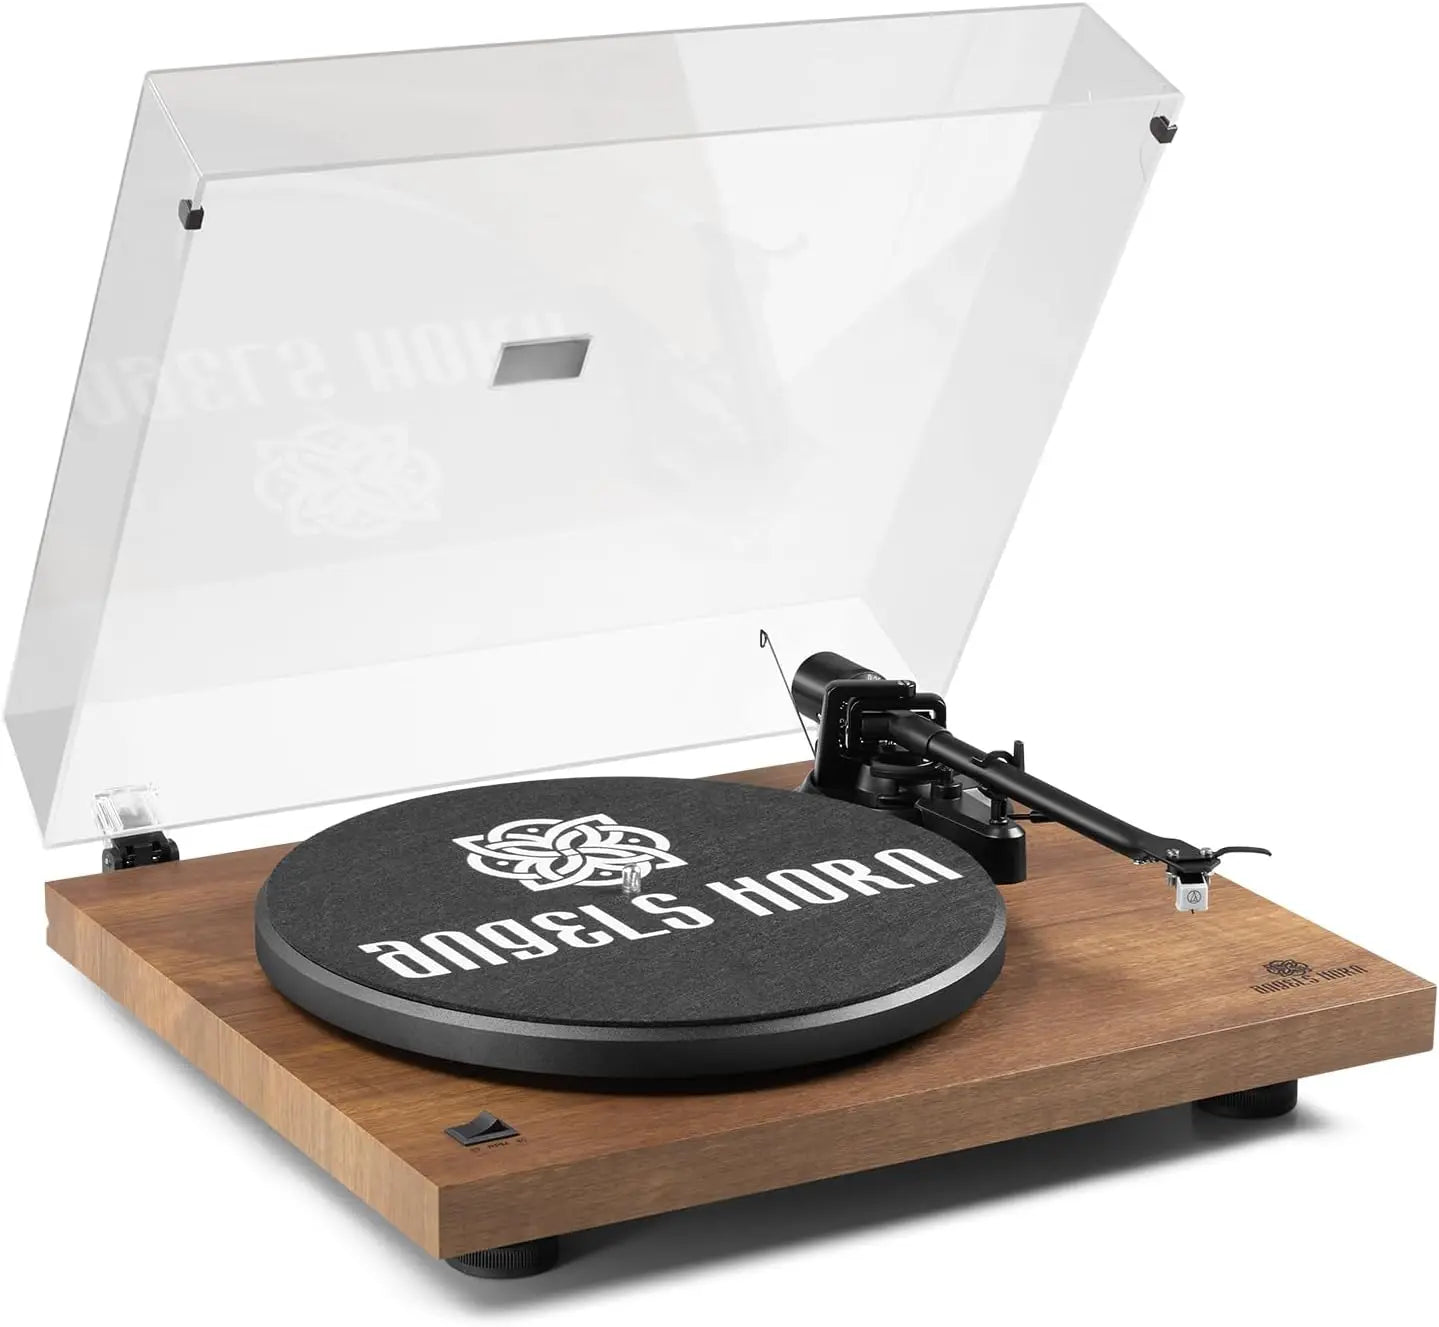 Angels Horn H002BT-OR Bluetooth Turntable Vinyl Record Player (Walnut)